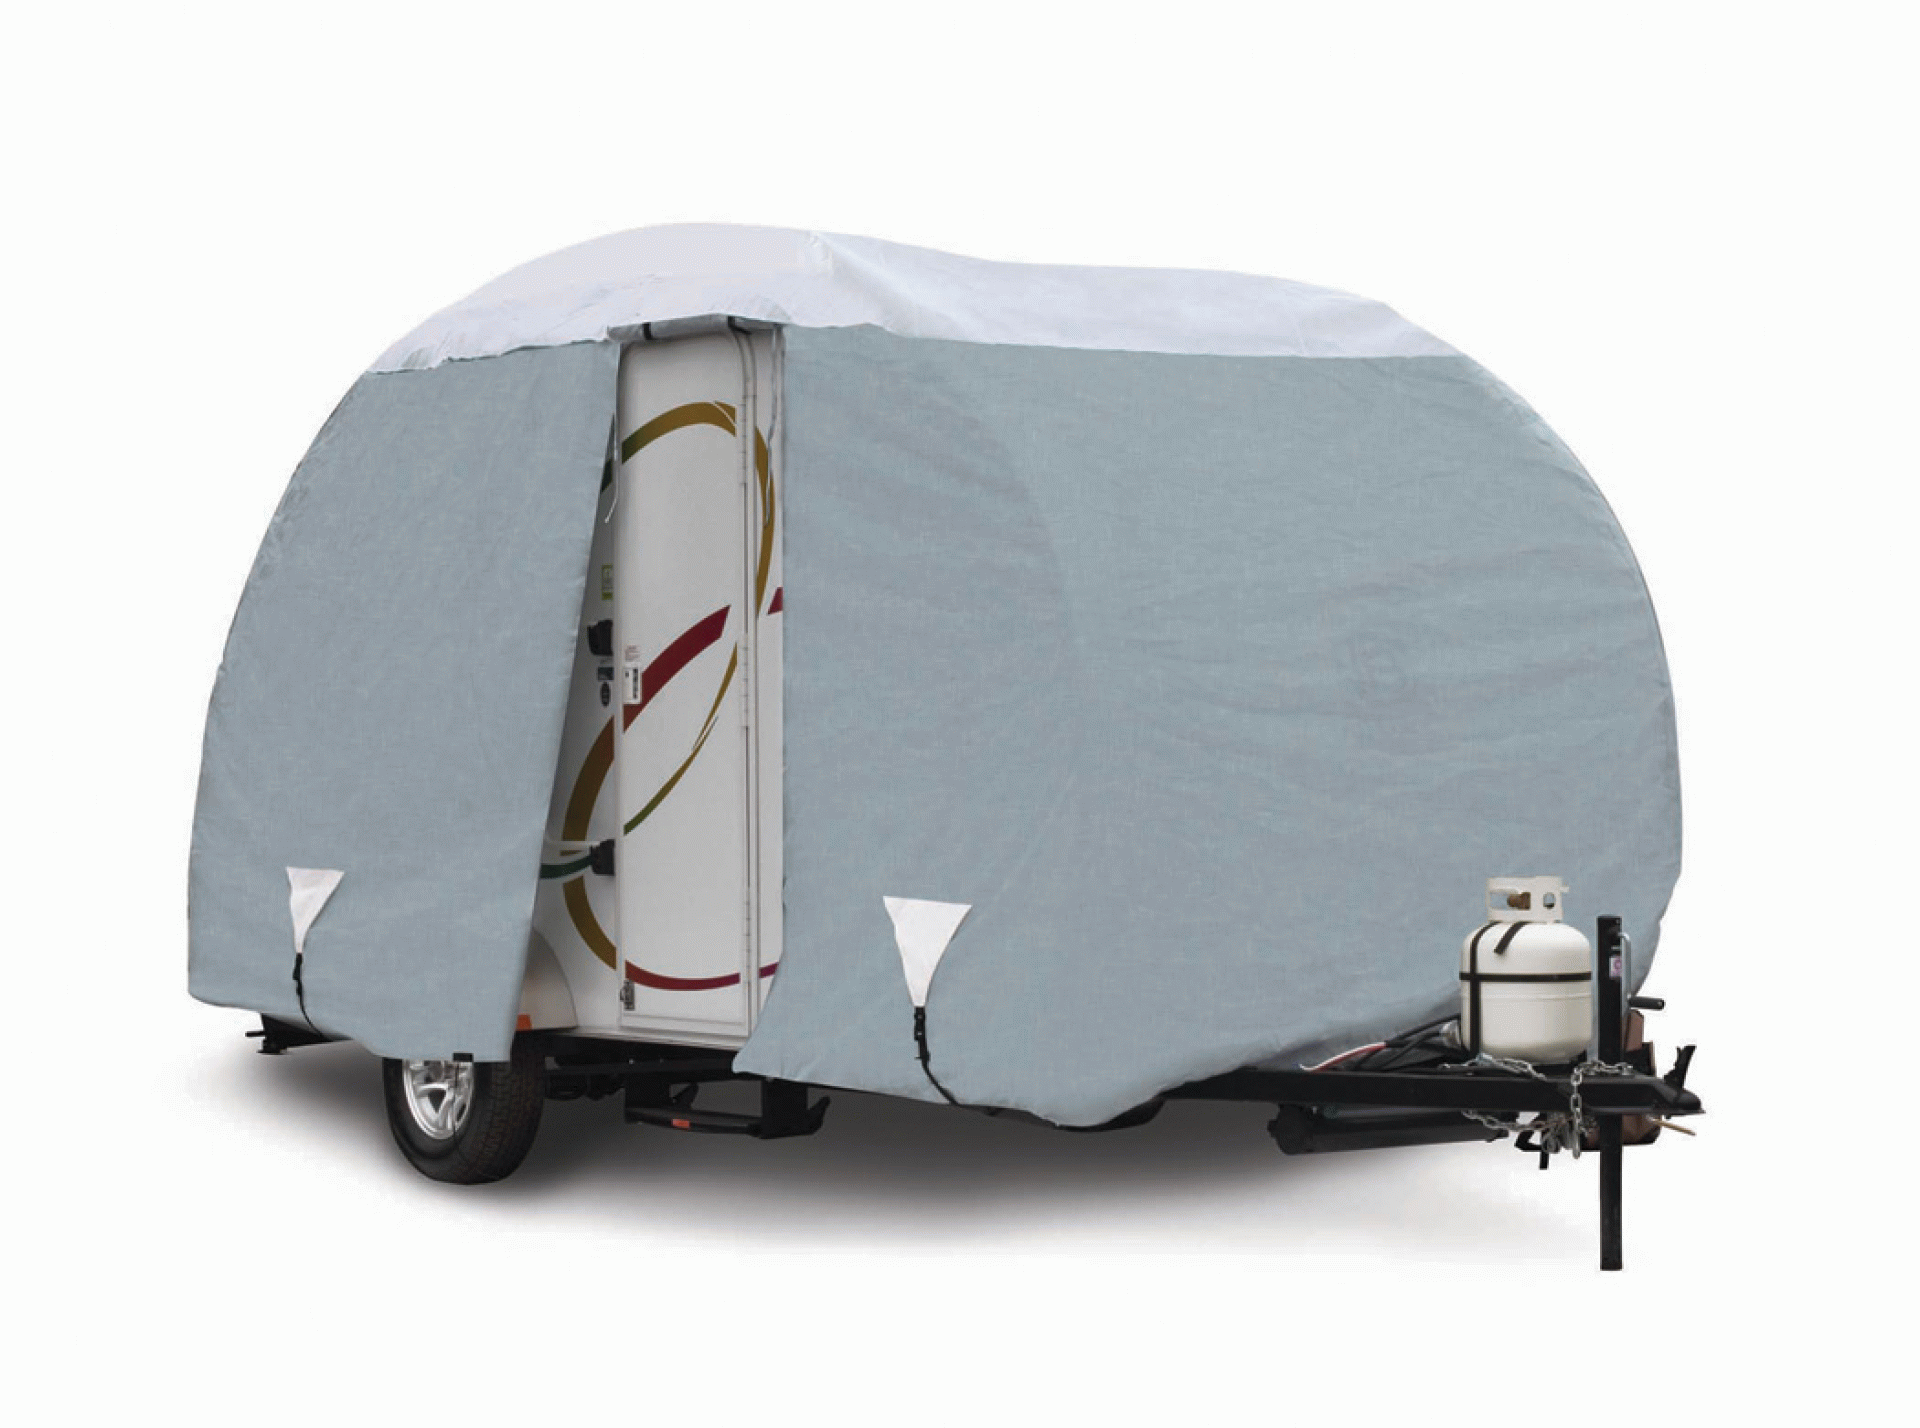 CLASSIC ACCESSORIES | 80-115-151001-00 | Cover Fits R-Pod 170 series up to 15' 1"